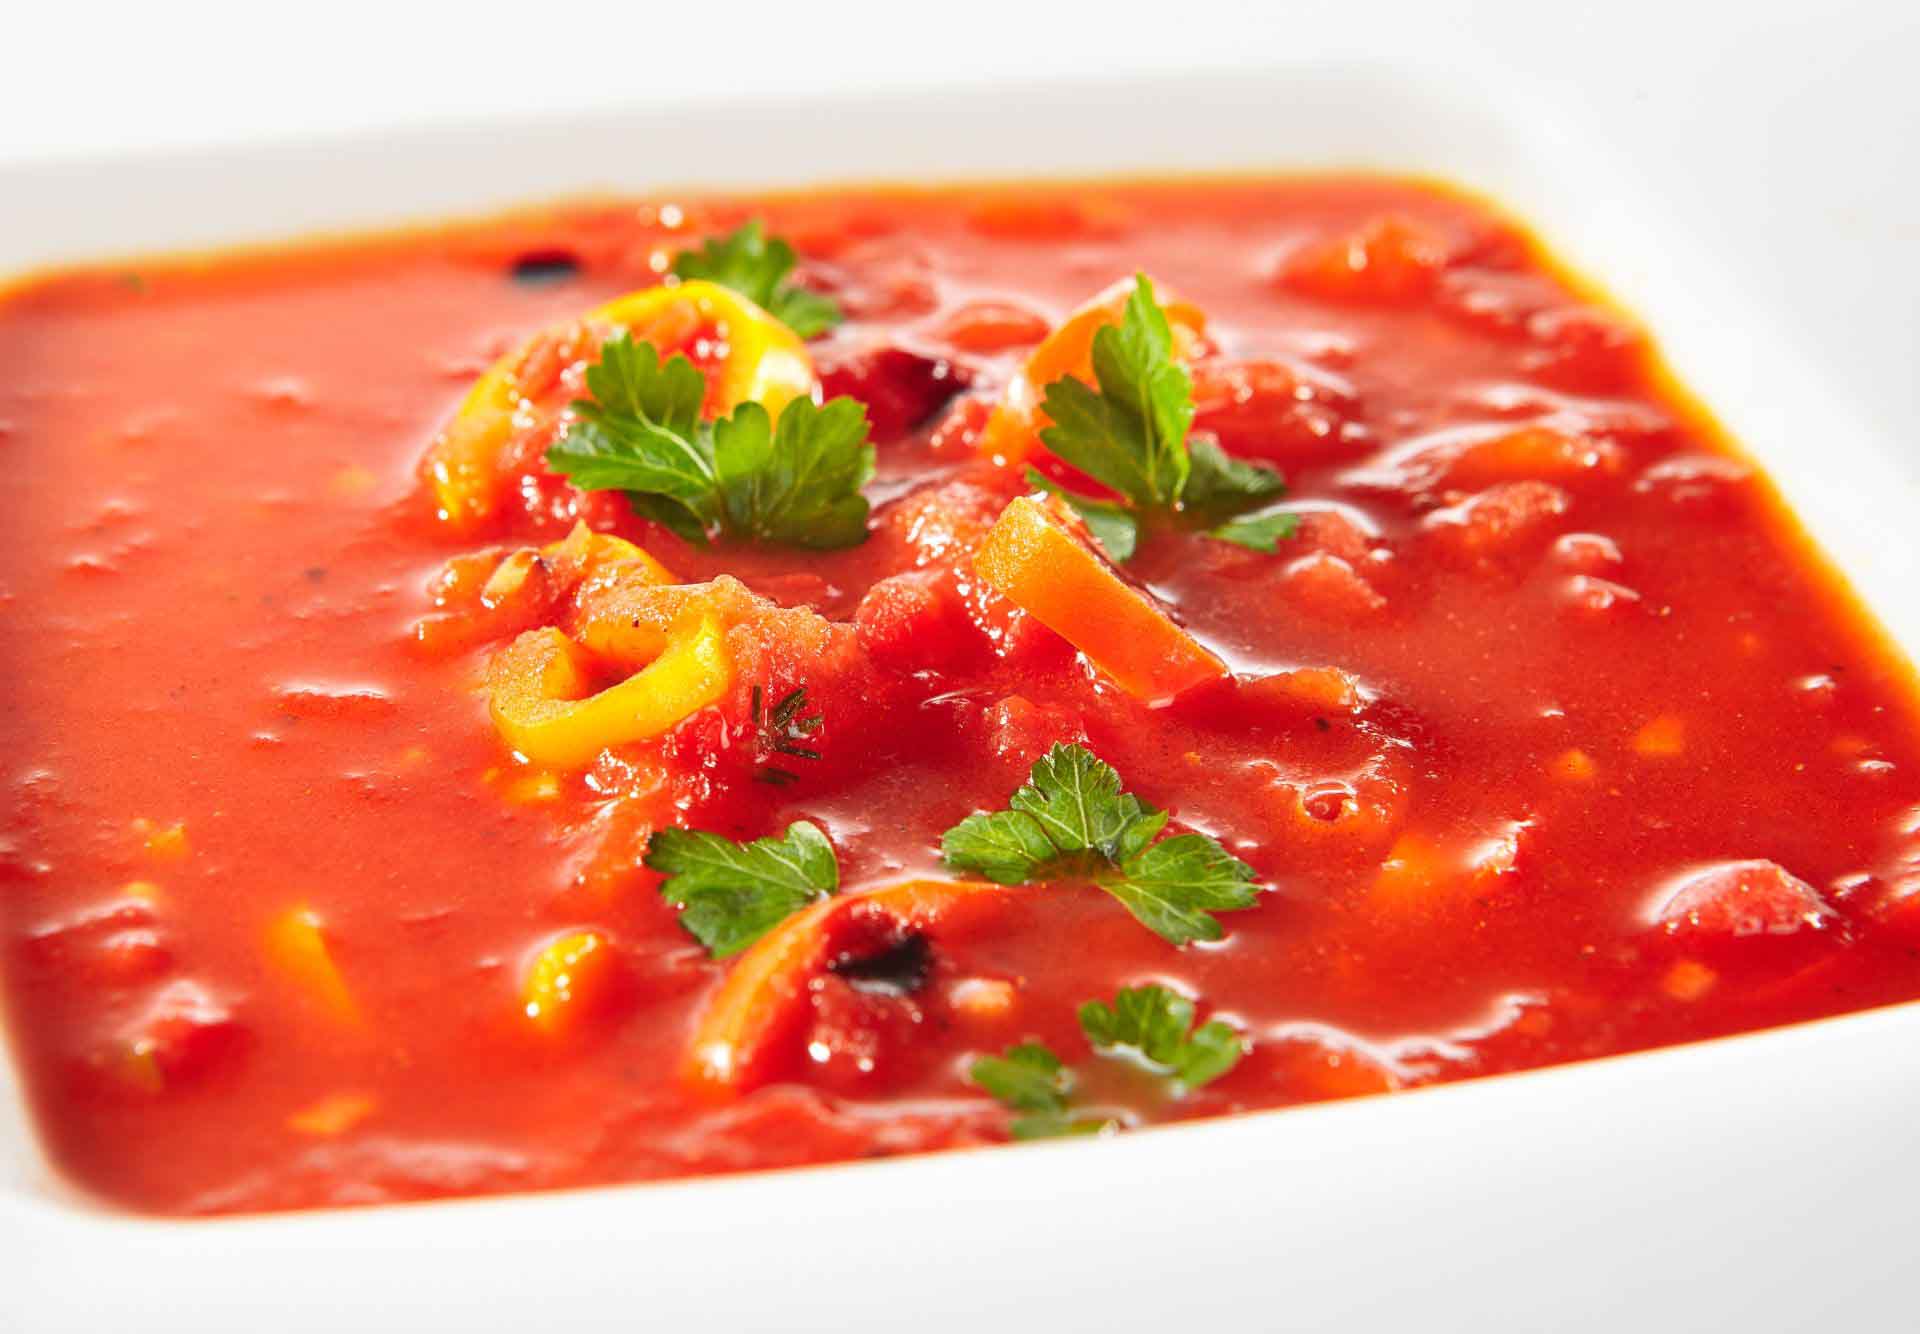 Shanghai-Style Red Vegetable Soup